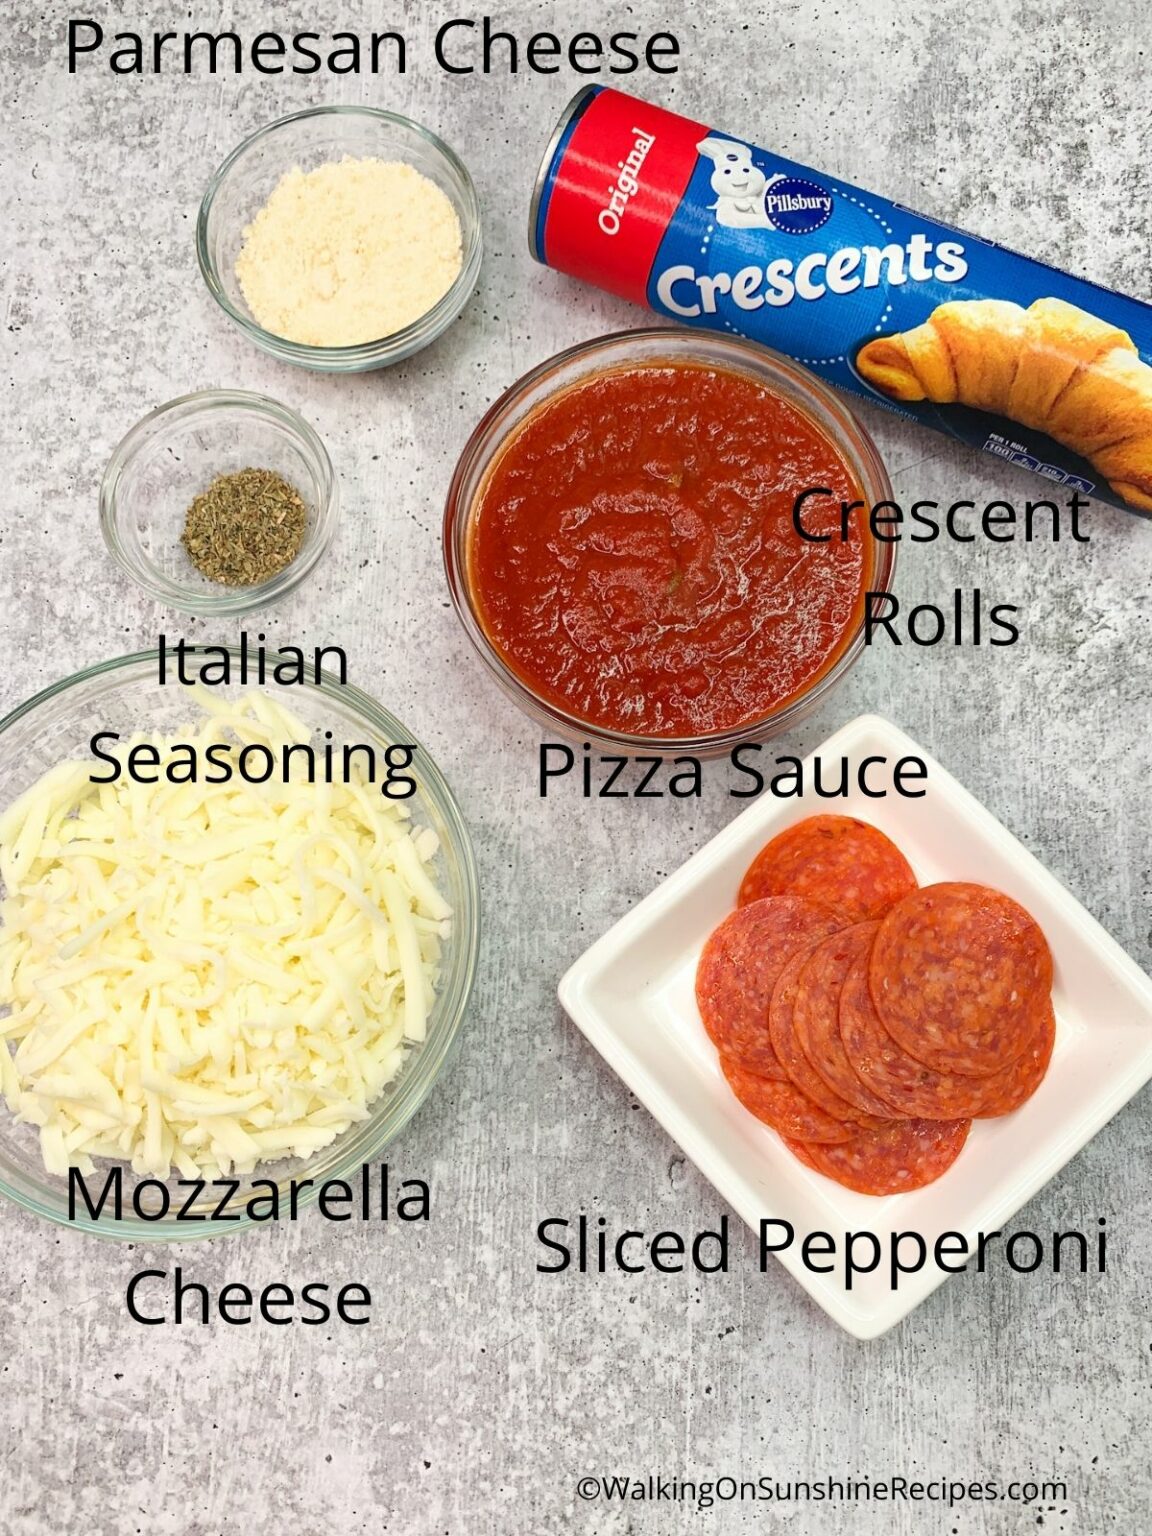 Making Pizza with Crescent Rolls - Walking On Sunshine Recipes